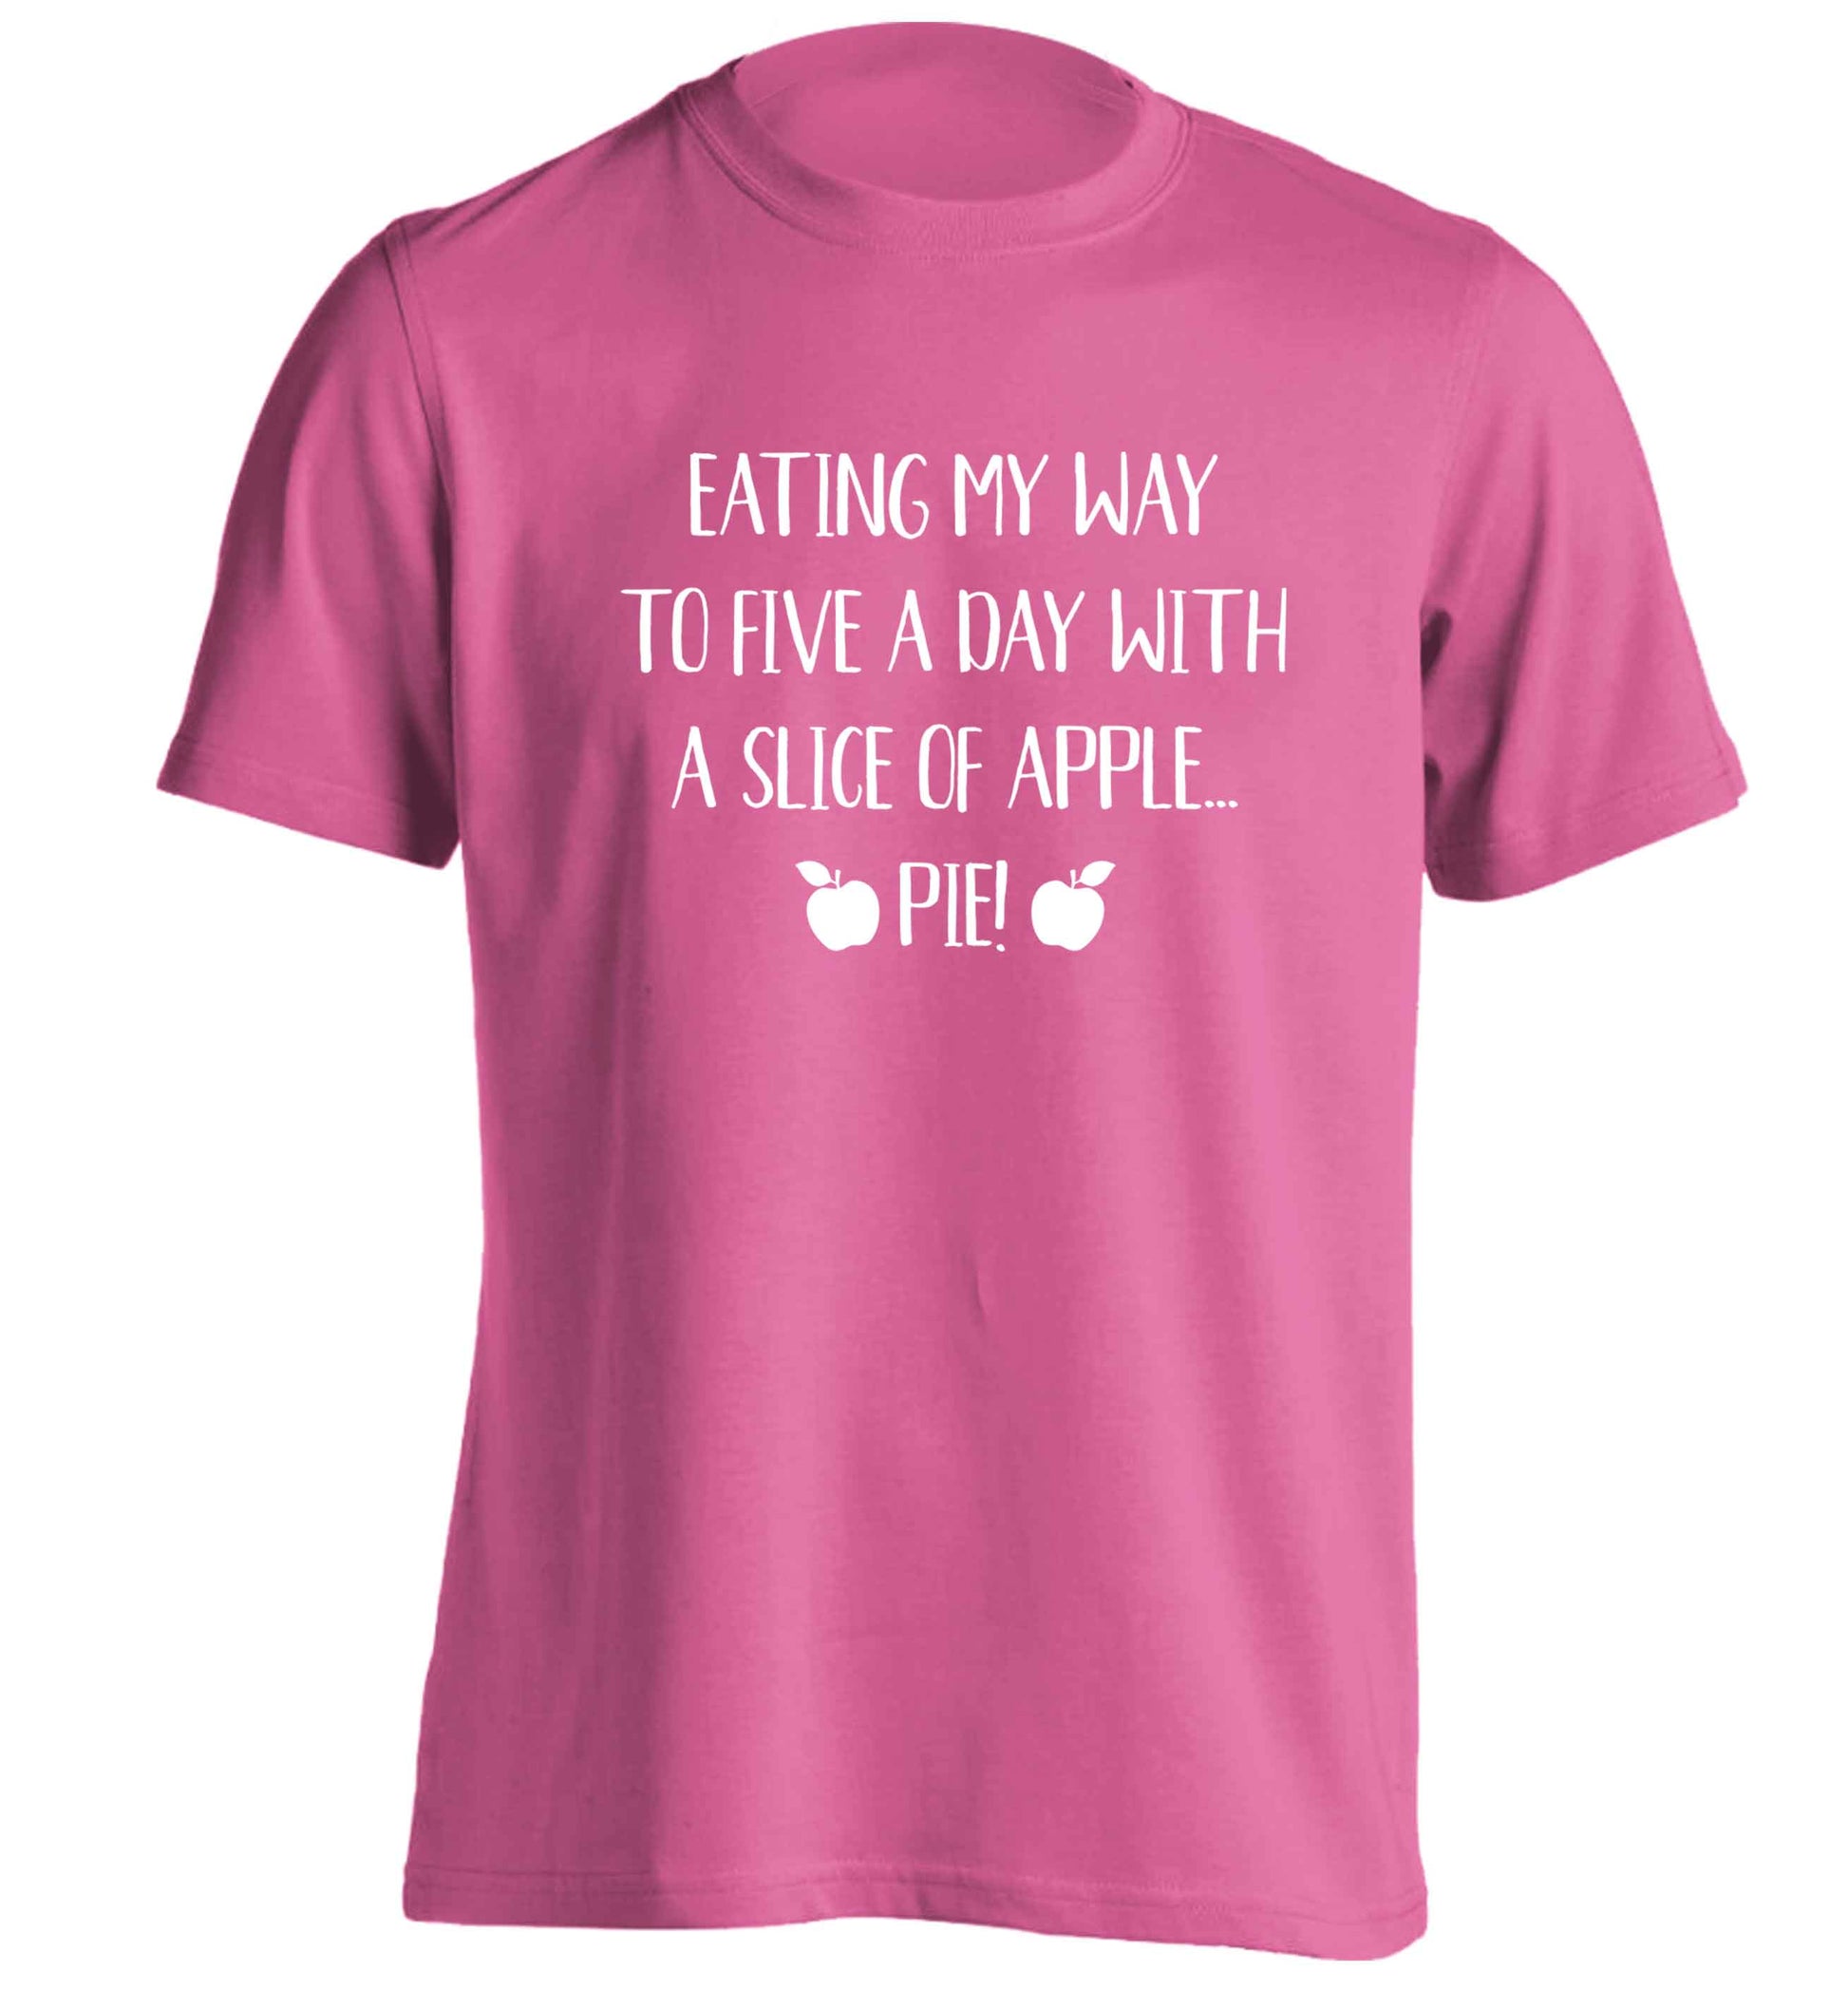 Eating my way to five a day with a slice of apple pie adults unisex pink Tshirt 2XL